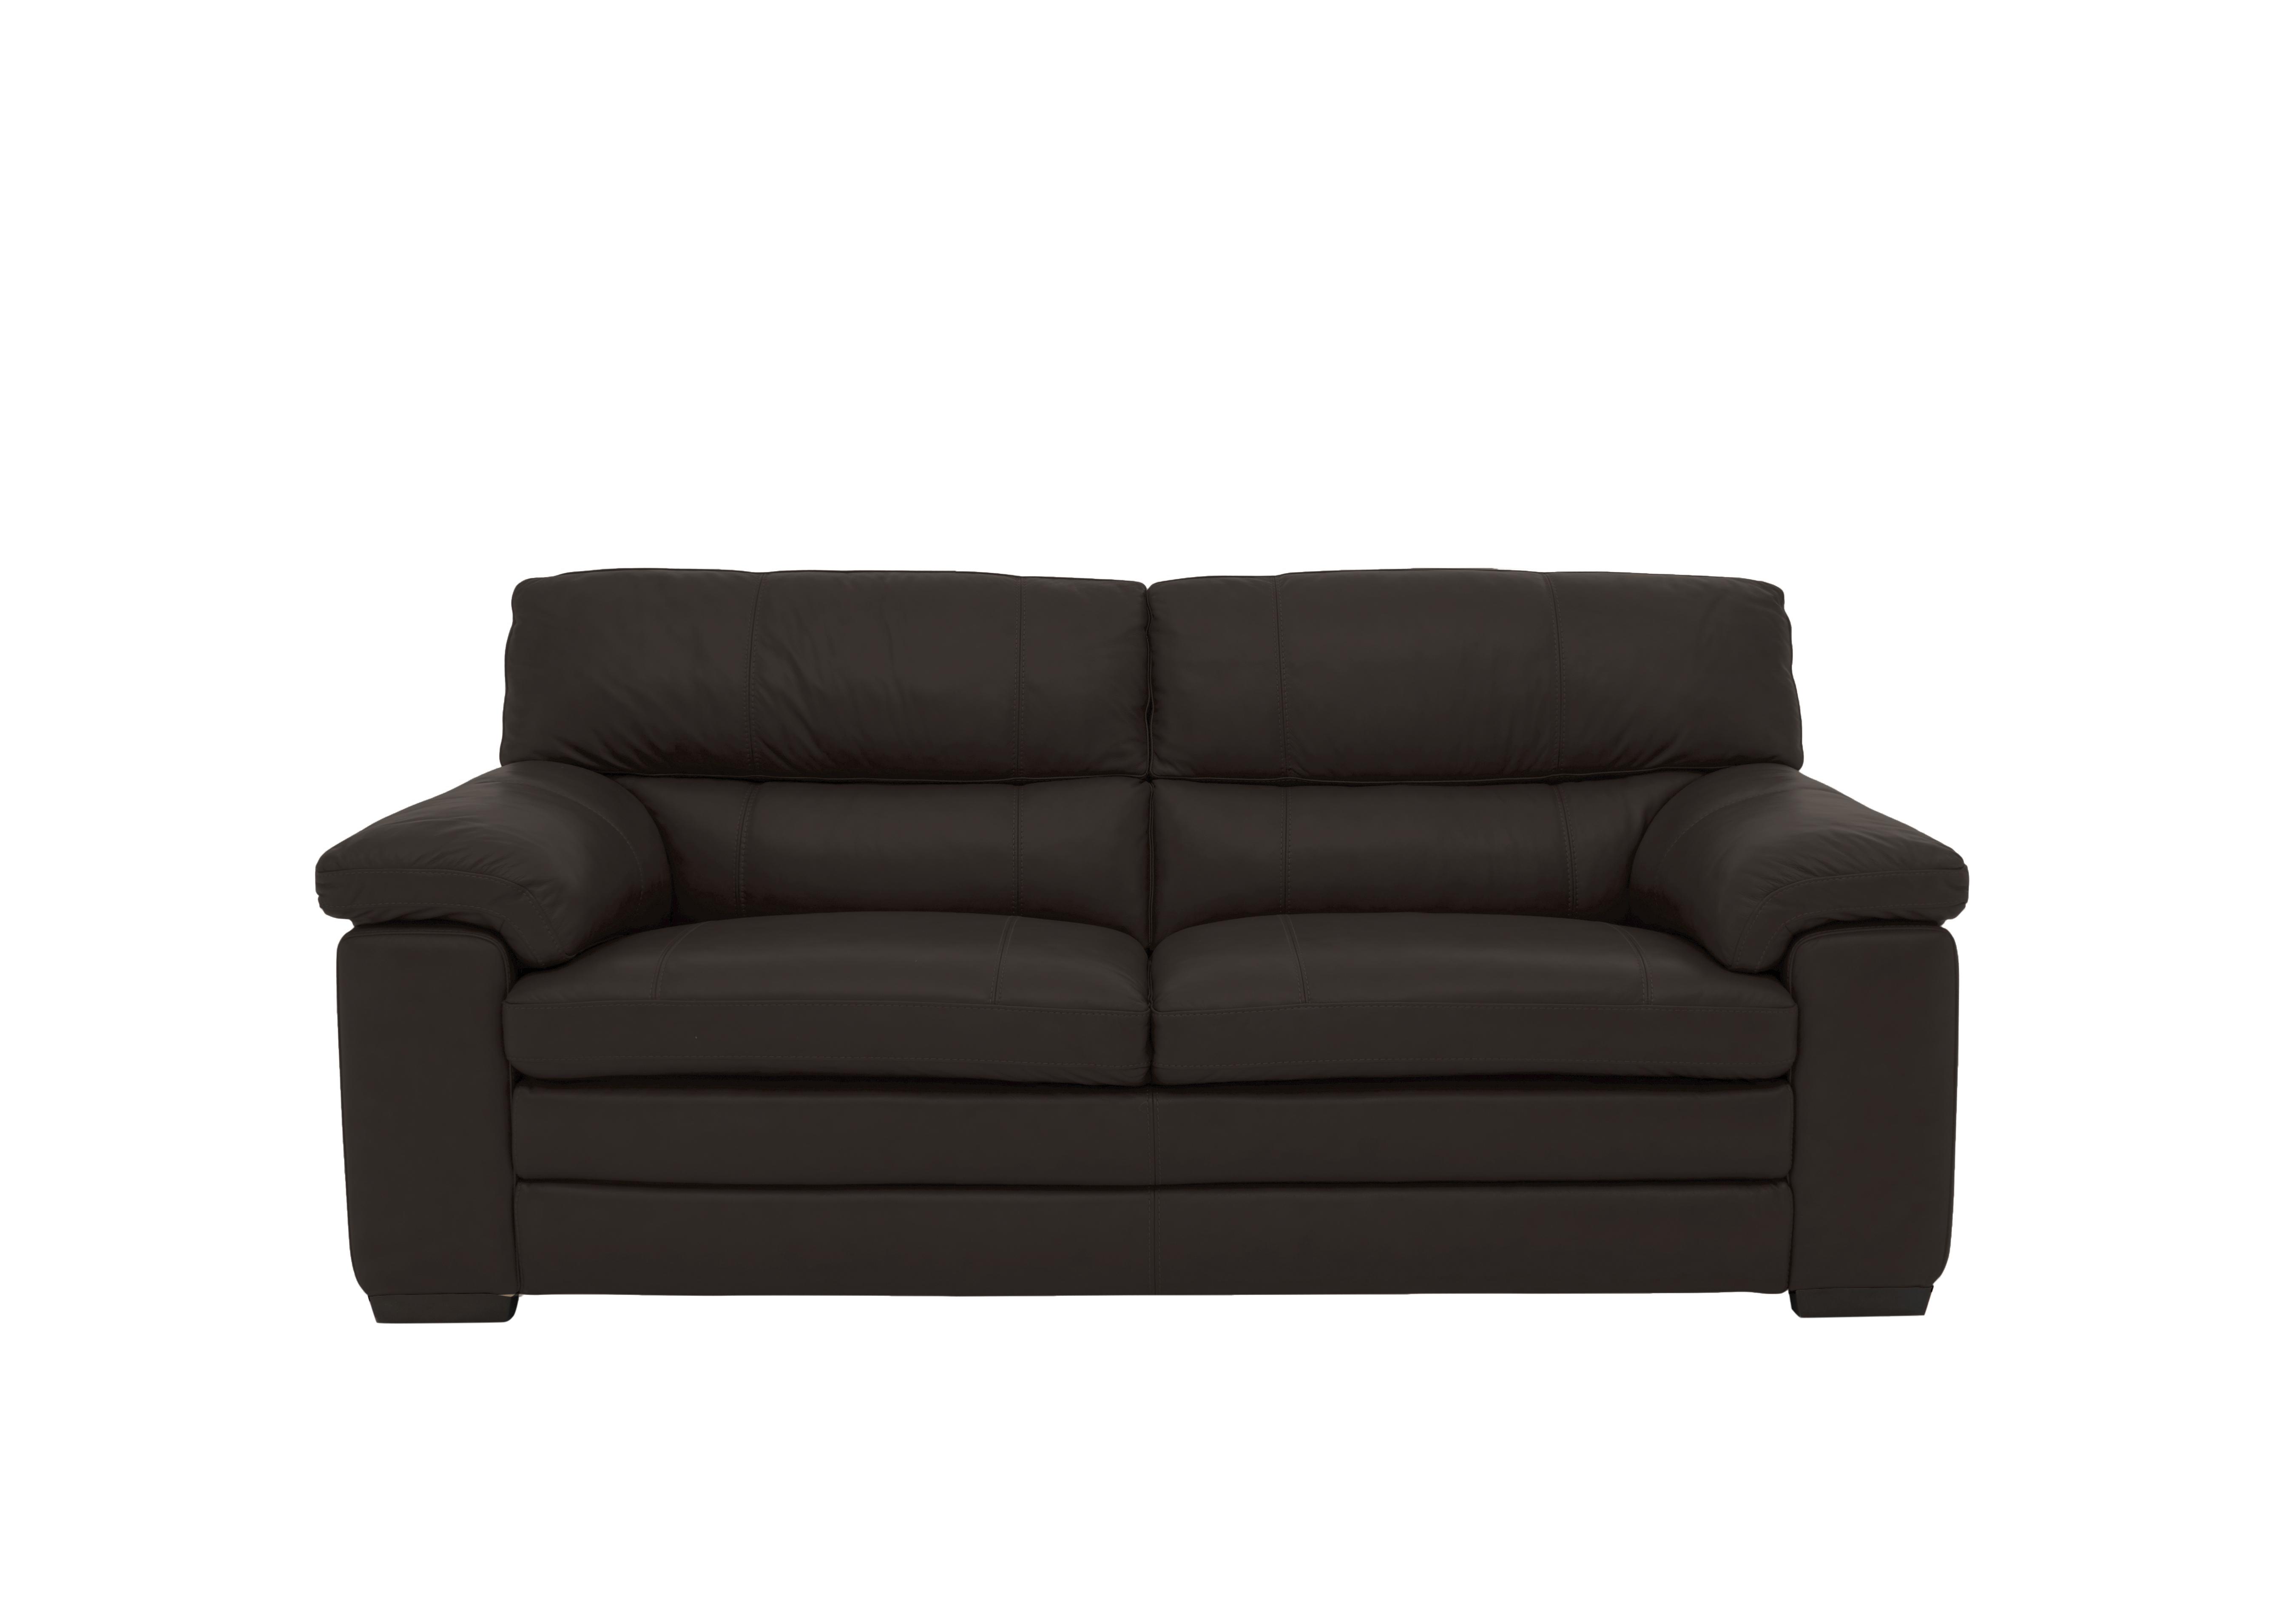 Cozee Leather 2.5 Seater Sofa in Bv-1748 Dark Chocolate on Furniture Village